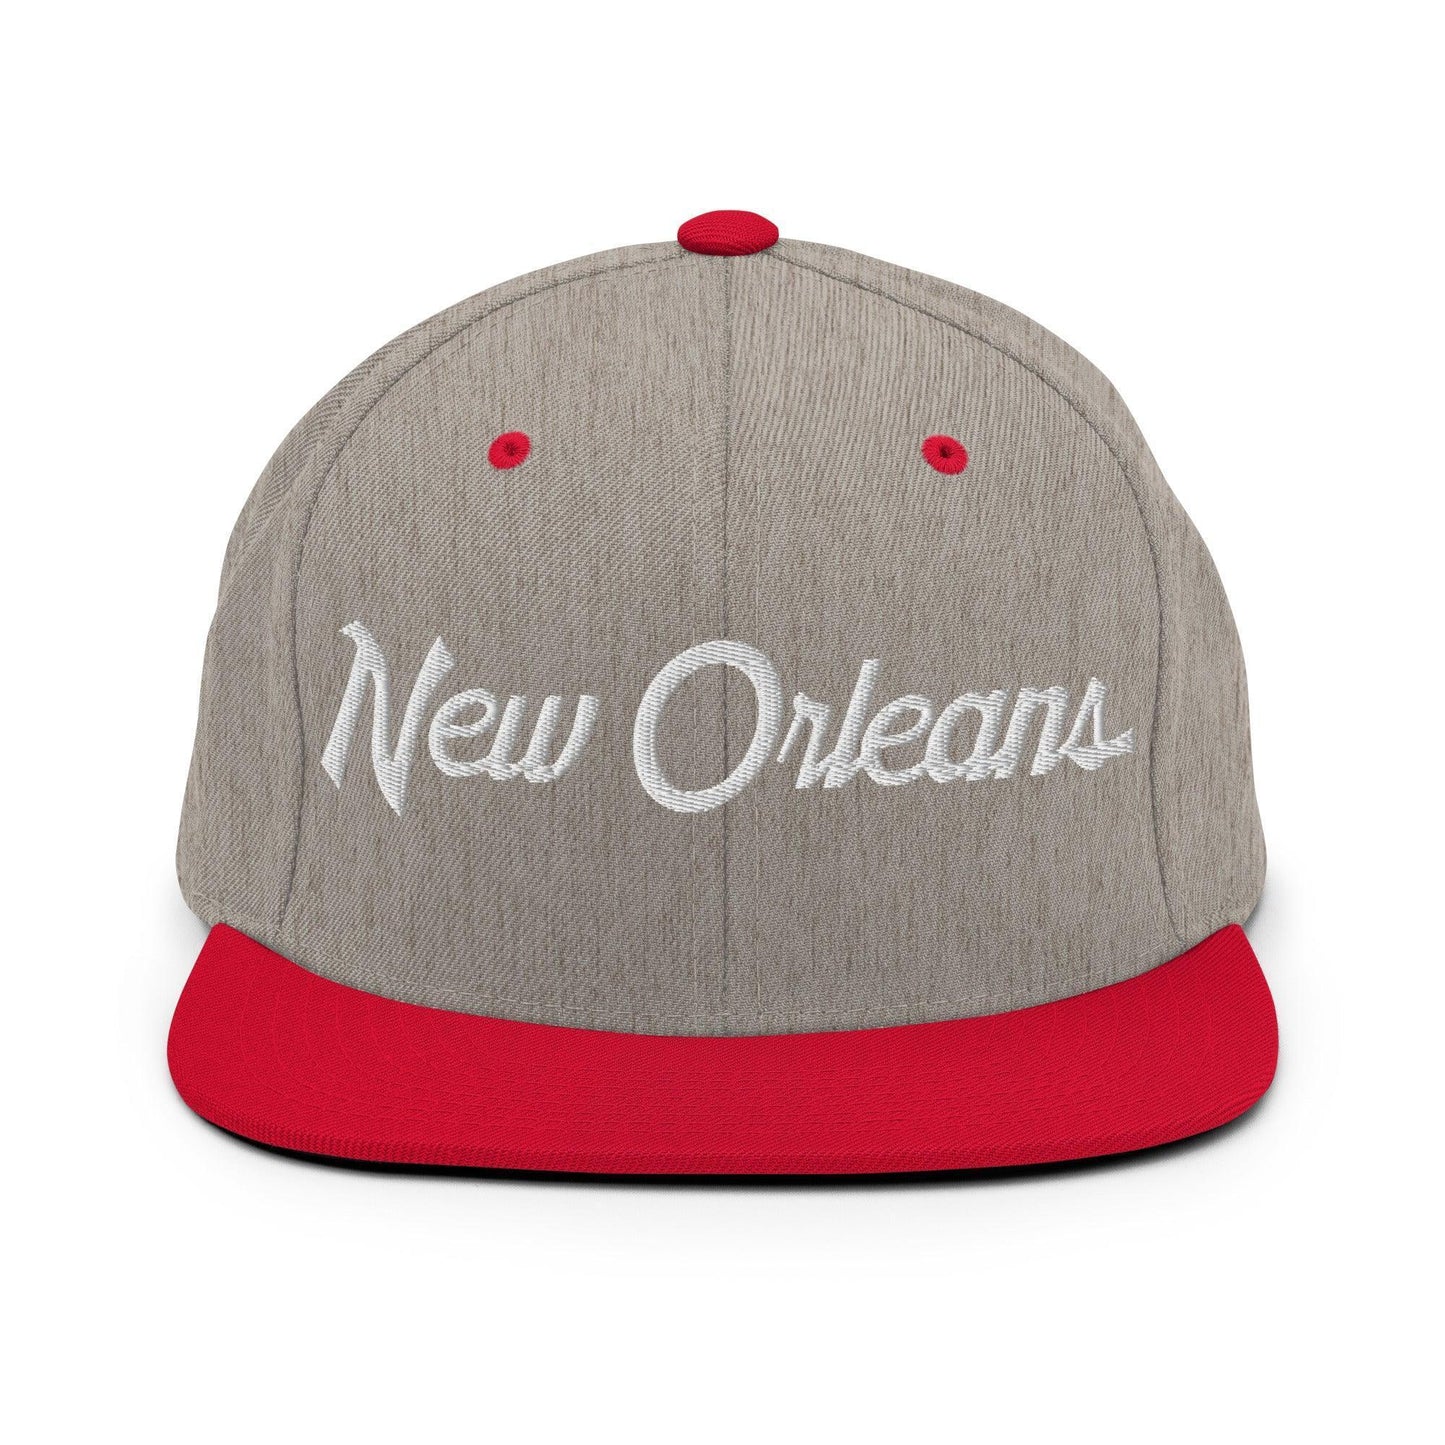 New Orleans Script Snapback Hat Heather Grey/ Red